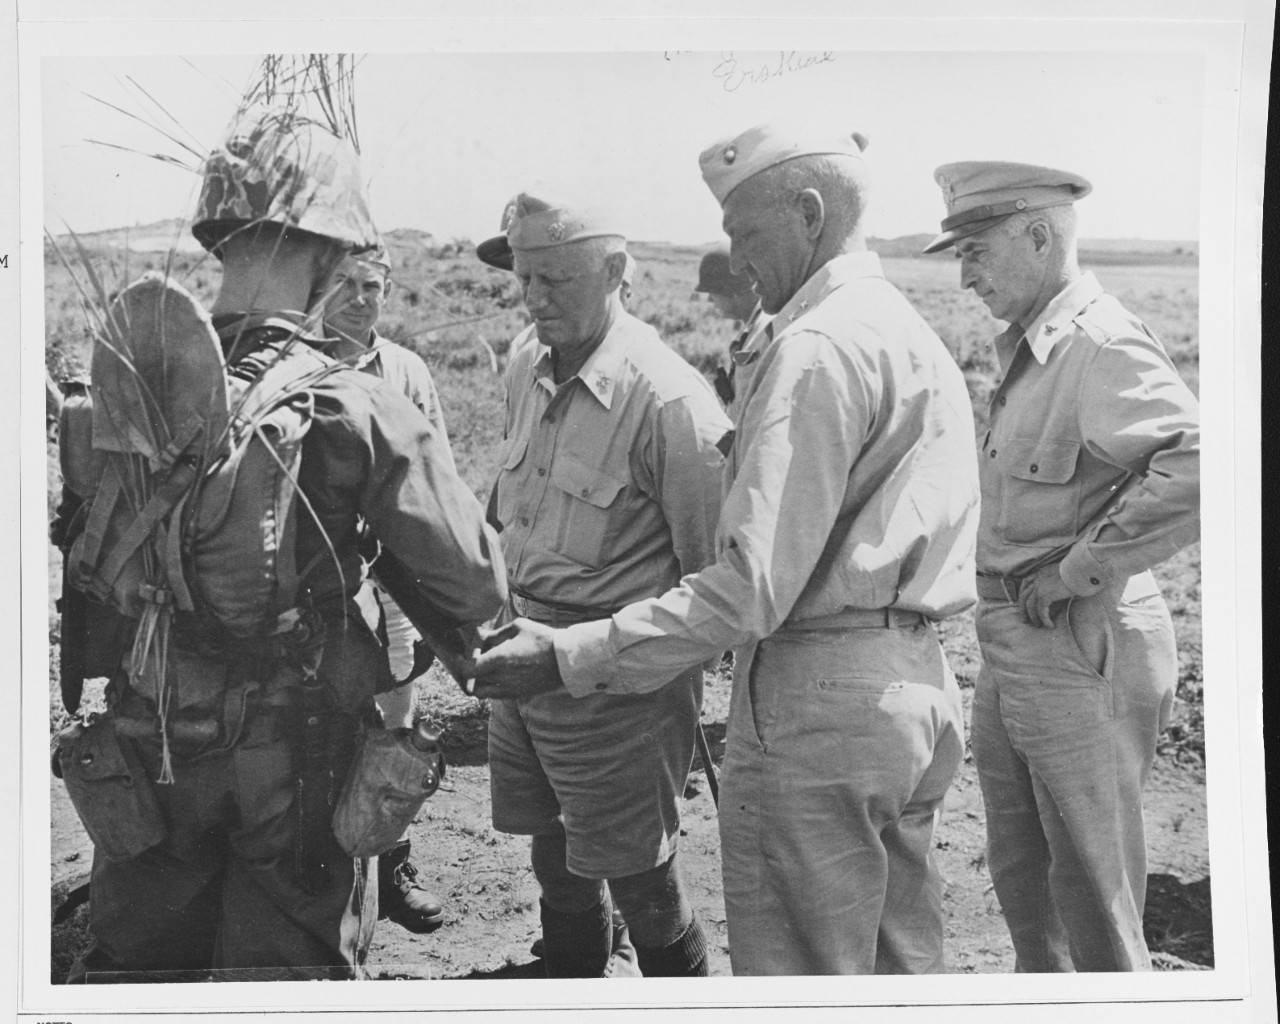 Fleet Admiral Chester W. Nimitz (CinCPac-POA), center, has the gear of a combat marine (3rd MarDiv) explained to him by MGen. G. B. Erskine, USMC.